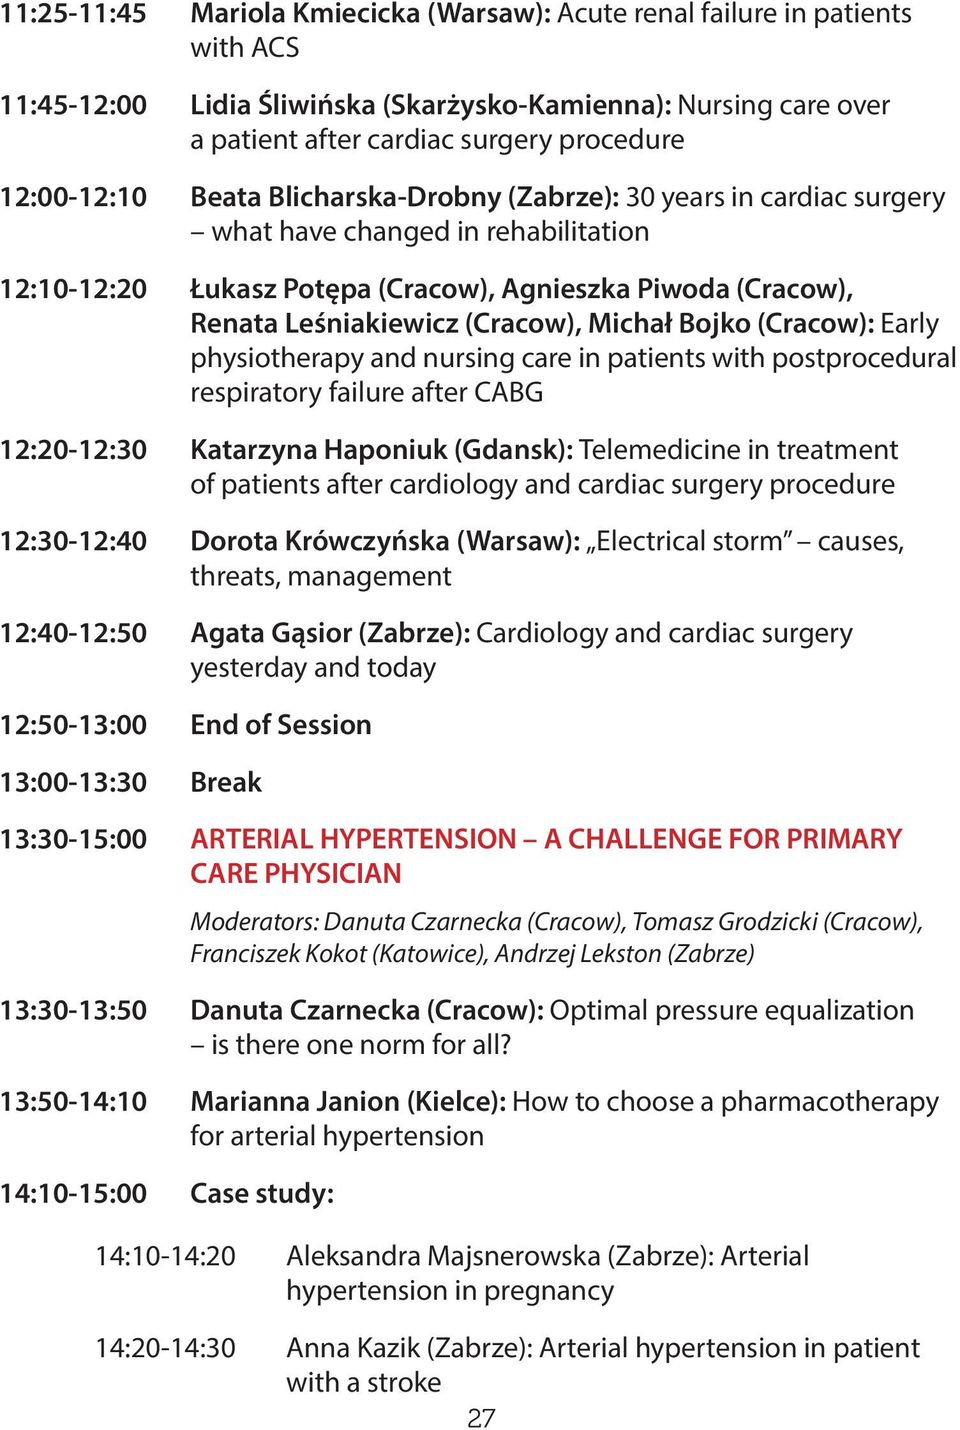 (Cracow), Michał Bojko (Cracow): Early physiotherapy and nursing care in patients with postprocedural respiratory failure after CABG 12:20-12:30 Katarzyna Haponiuk (Gdansk): Telemedicine in treatment